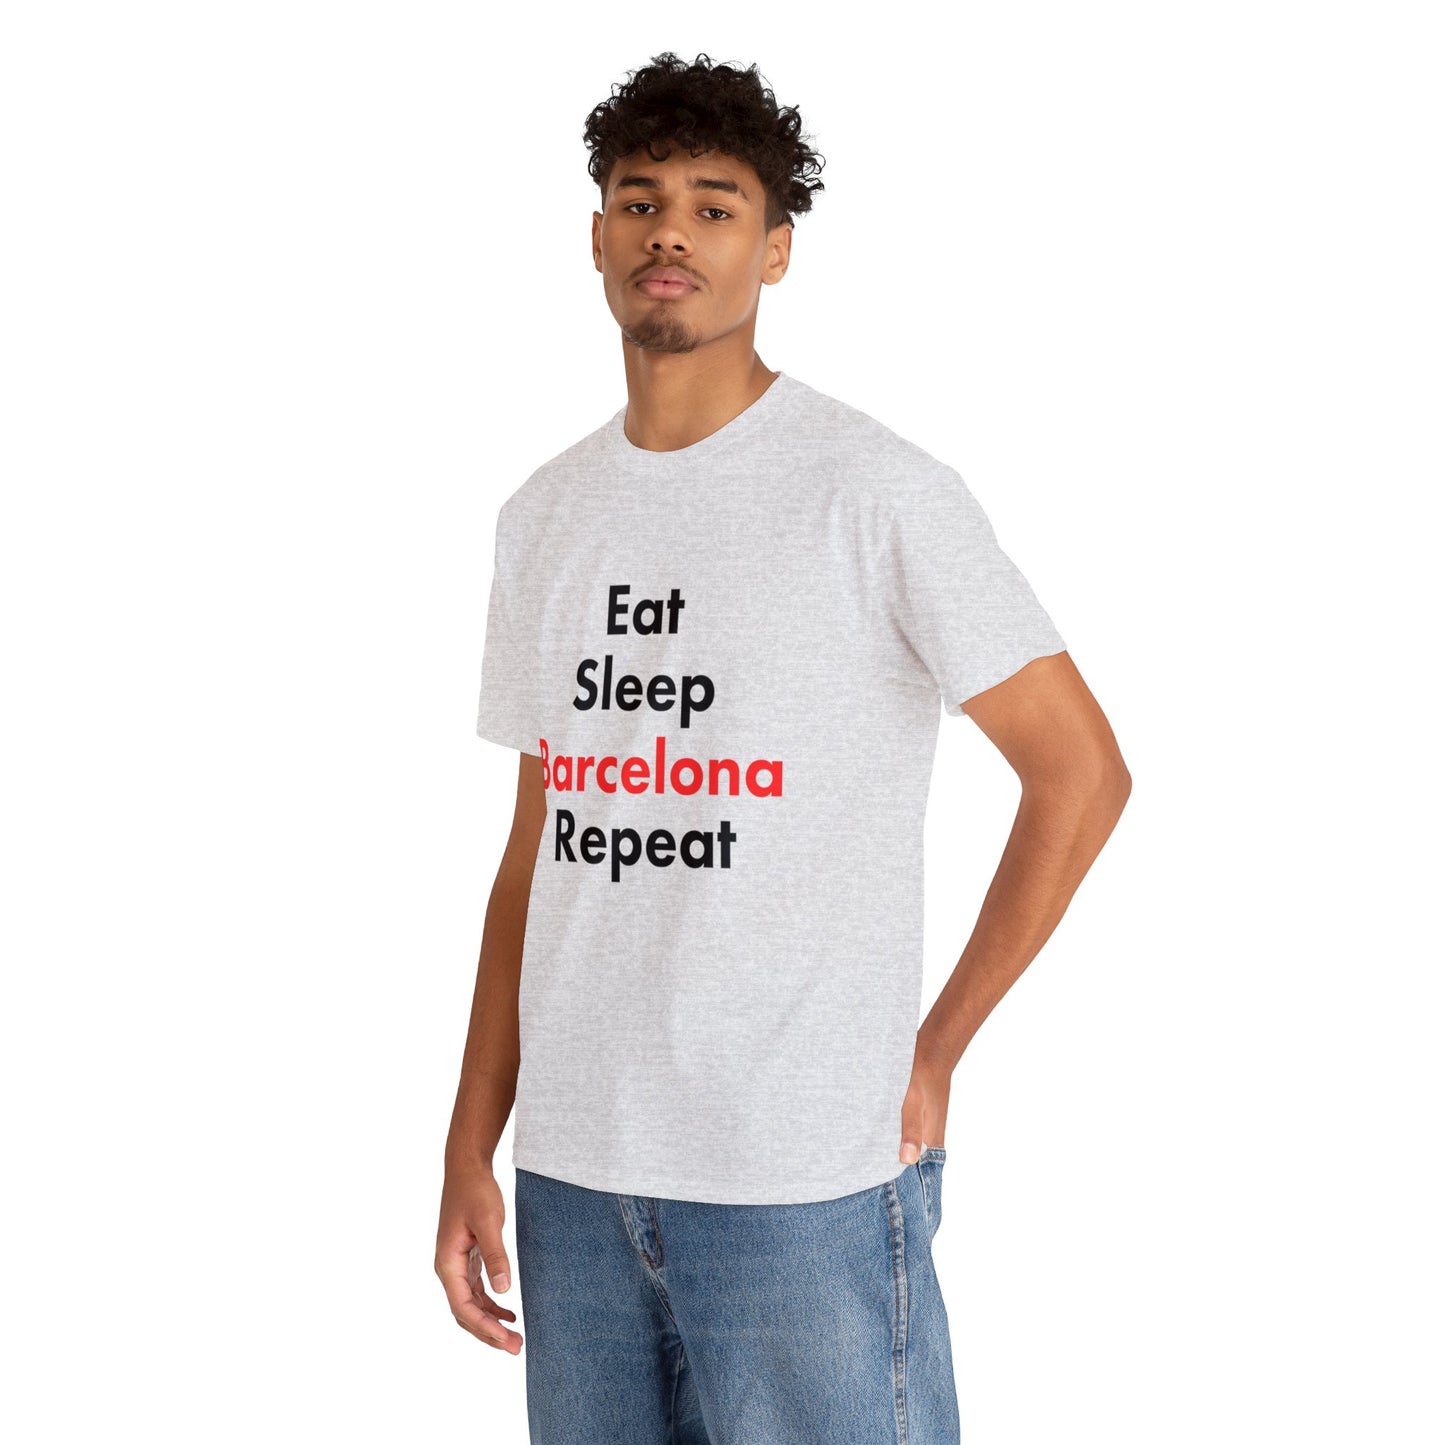 “Eat, Sleep, Barcelona, Repeat” Text T-shirt Unisex Heavy Cotton Tee Simple Text for Travelers